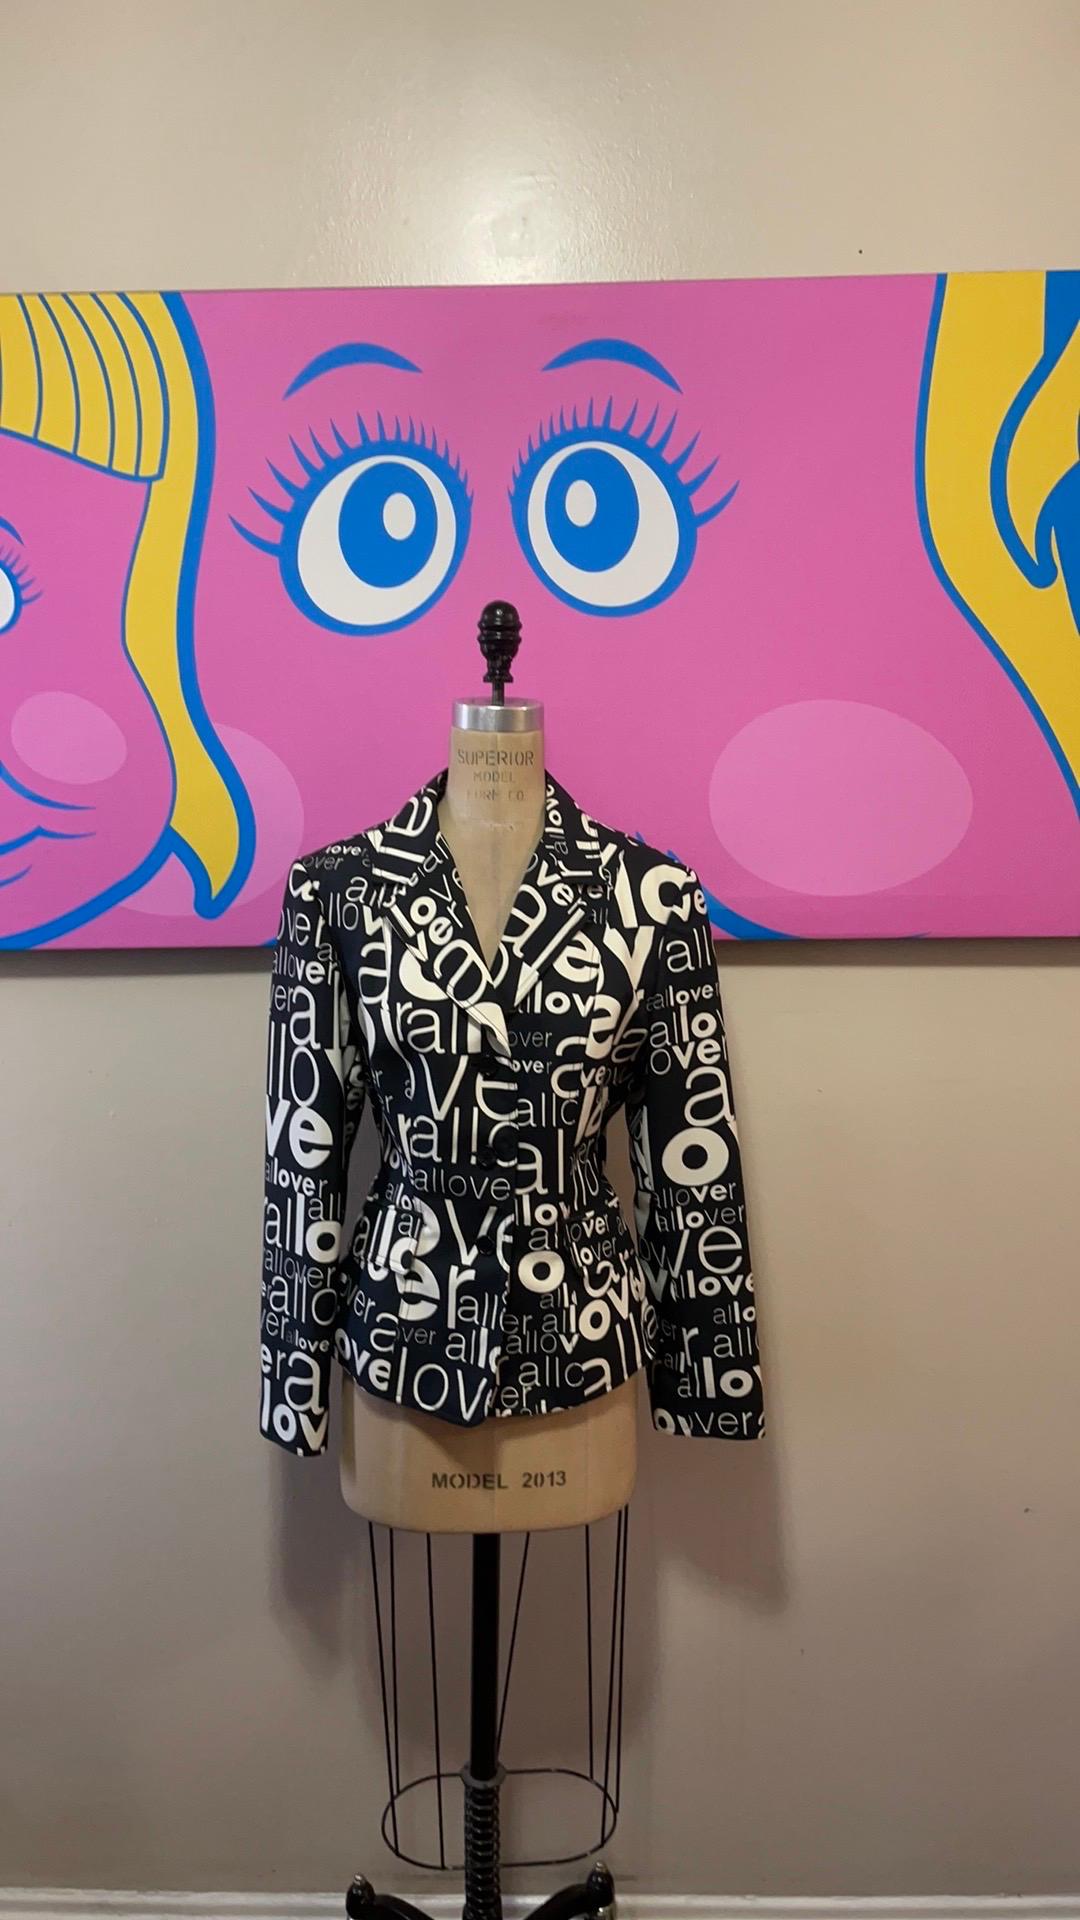 Moschino jeans black off white love blazer

Vintage perfection from Moschino Jeans with this Allover Print Jacket ! Pair with black or white skinny jeans for a great look.  Fran Drescher wore identical jacket in The Nanny with matching skirt.

Size